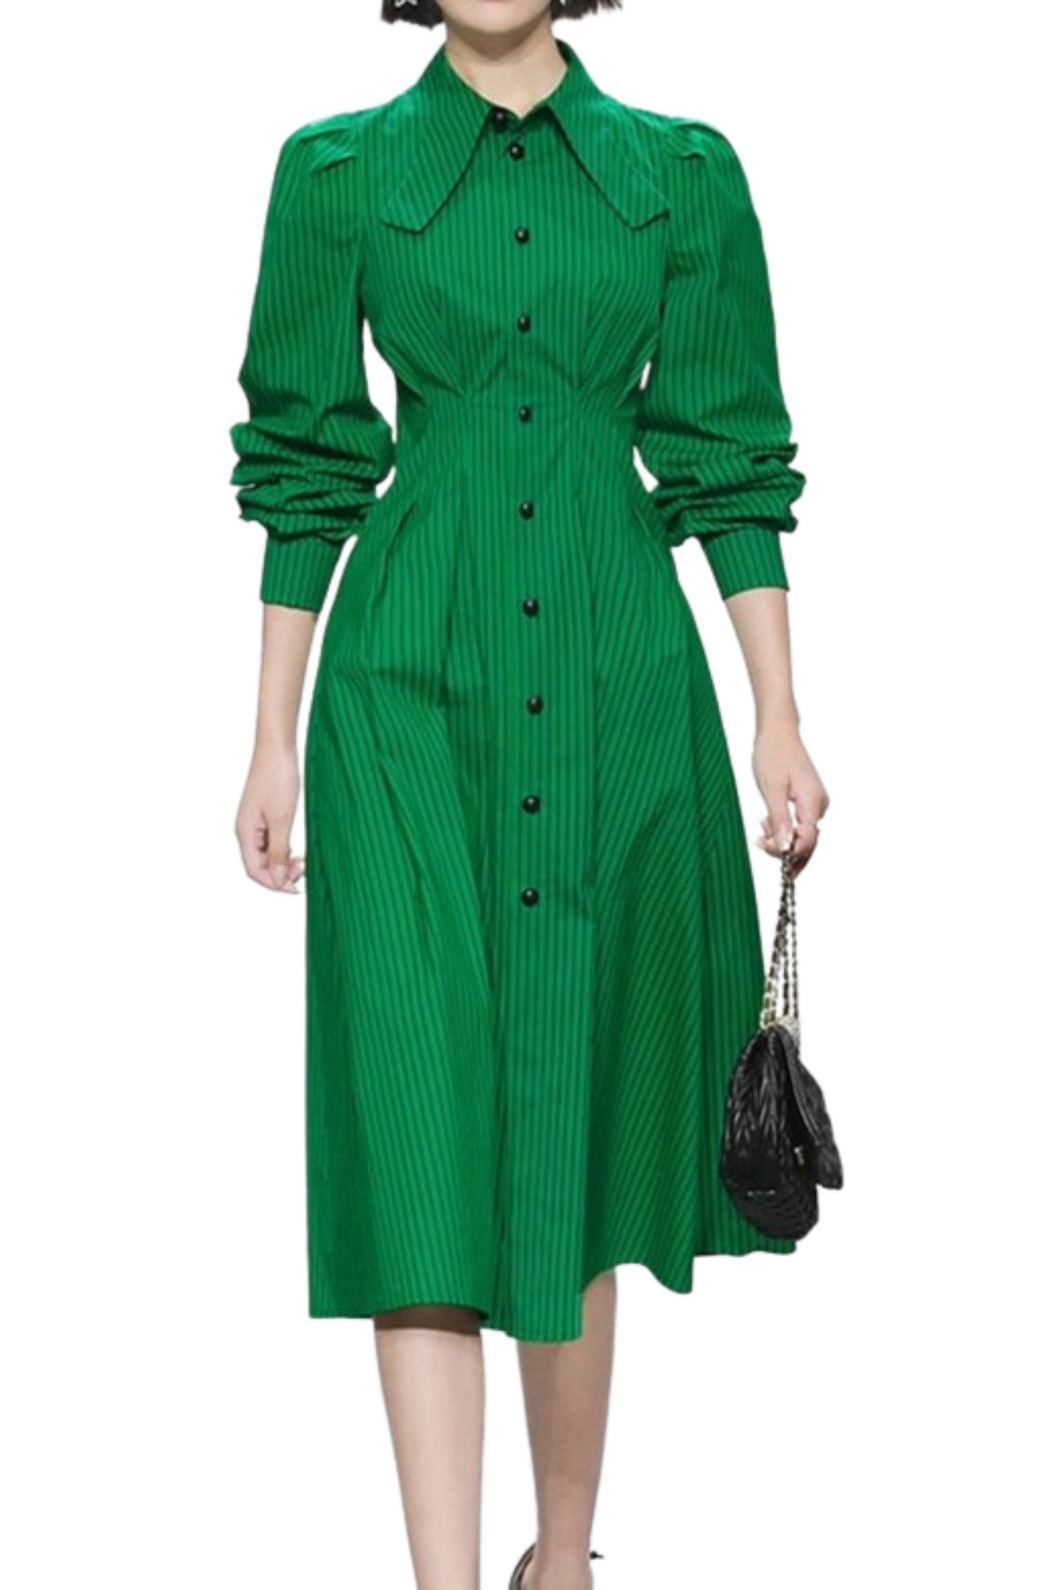 High Quality Midi Long Sleeves Striped Single Breasted Office Elegant Dress